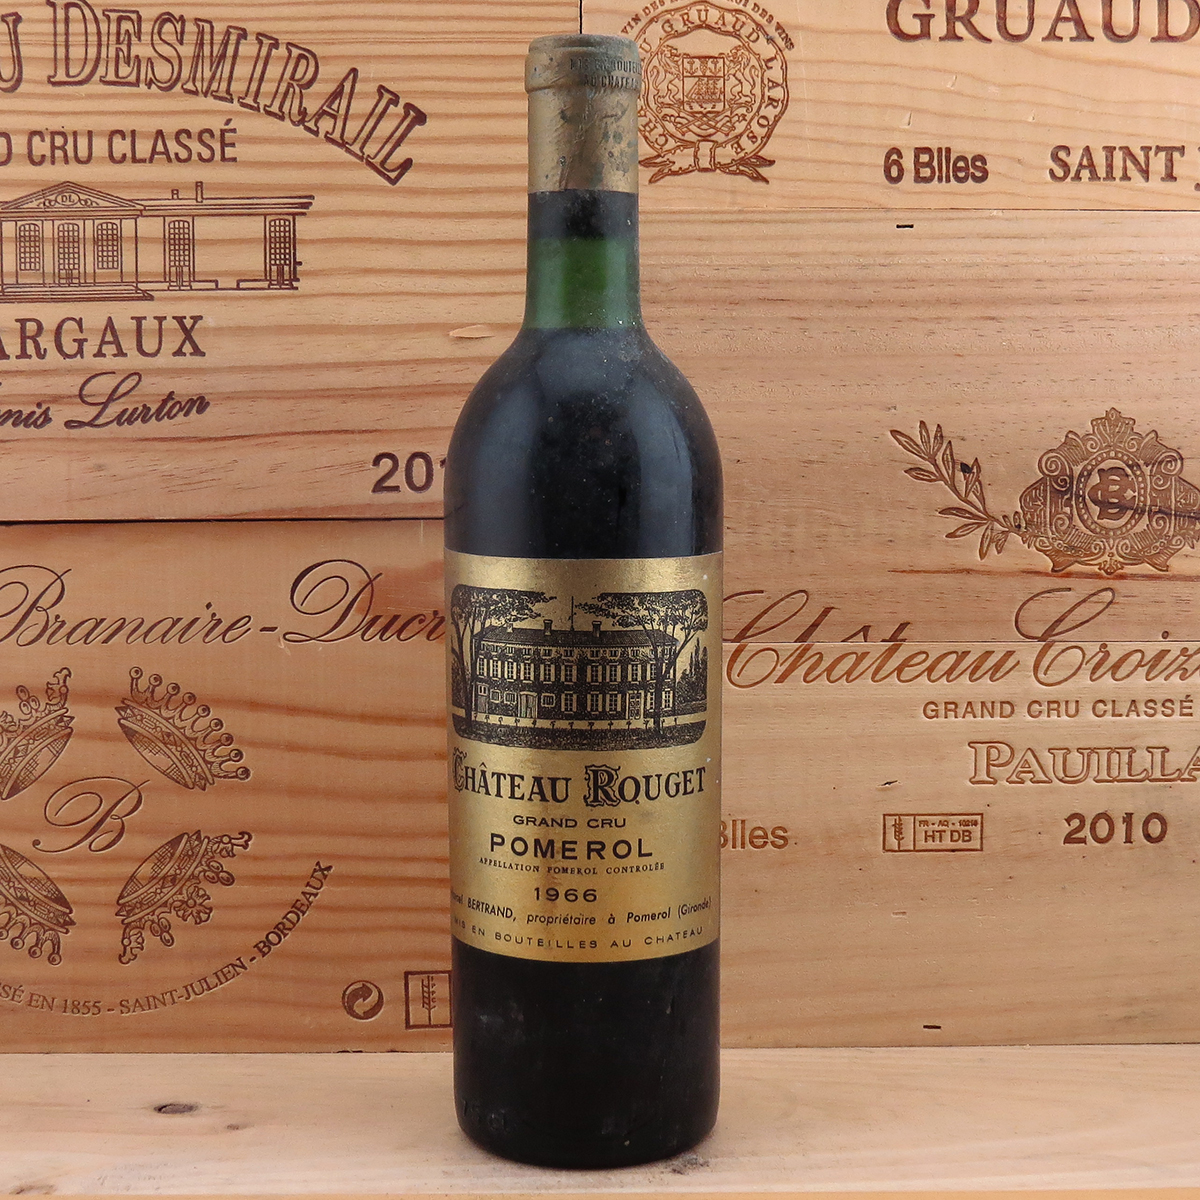 1966 Chateau Rouget